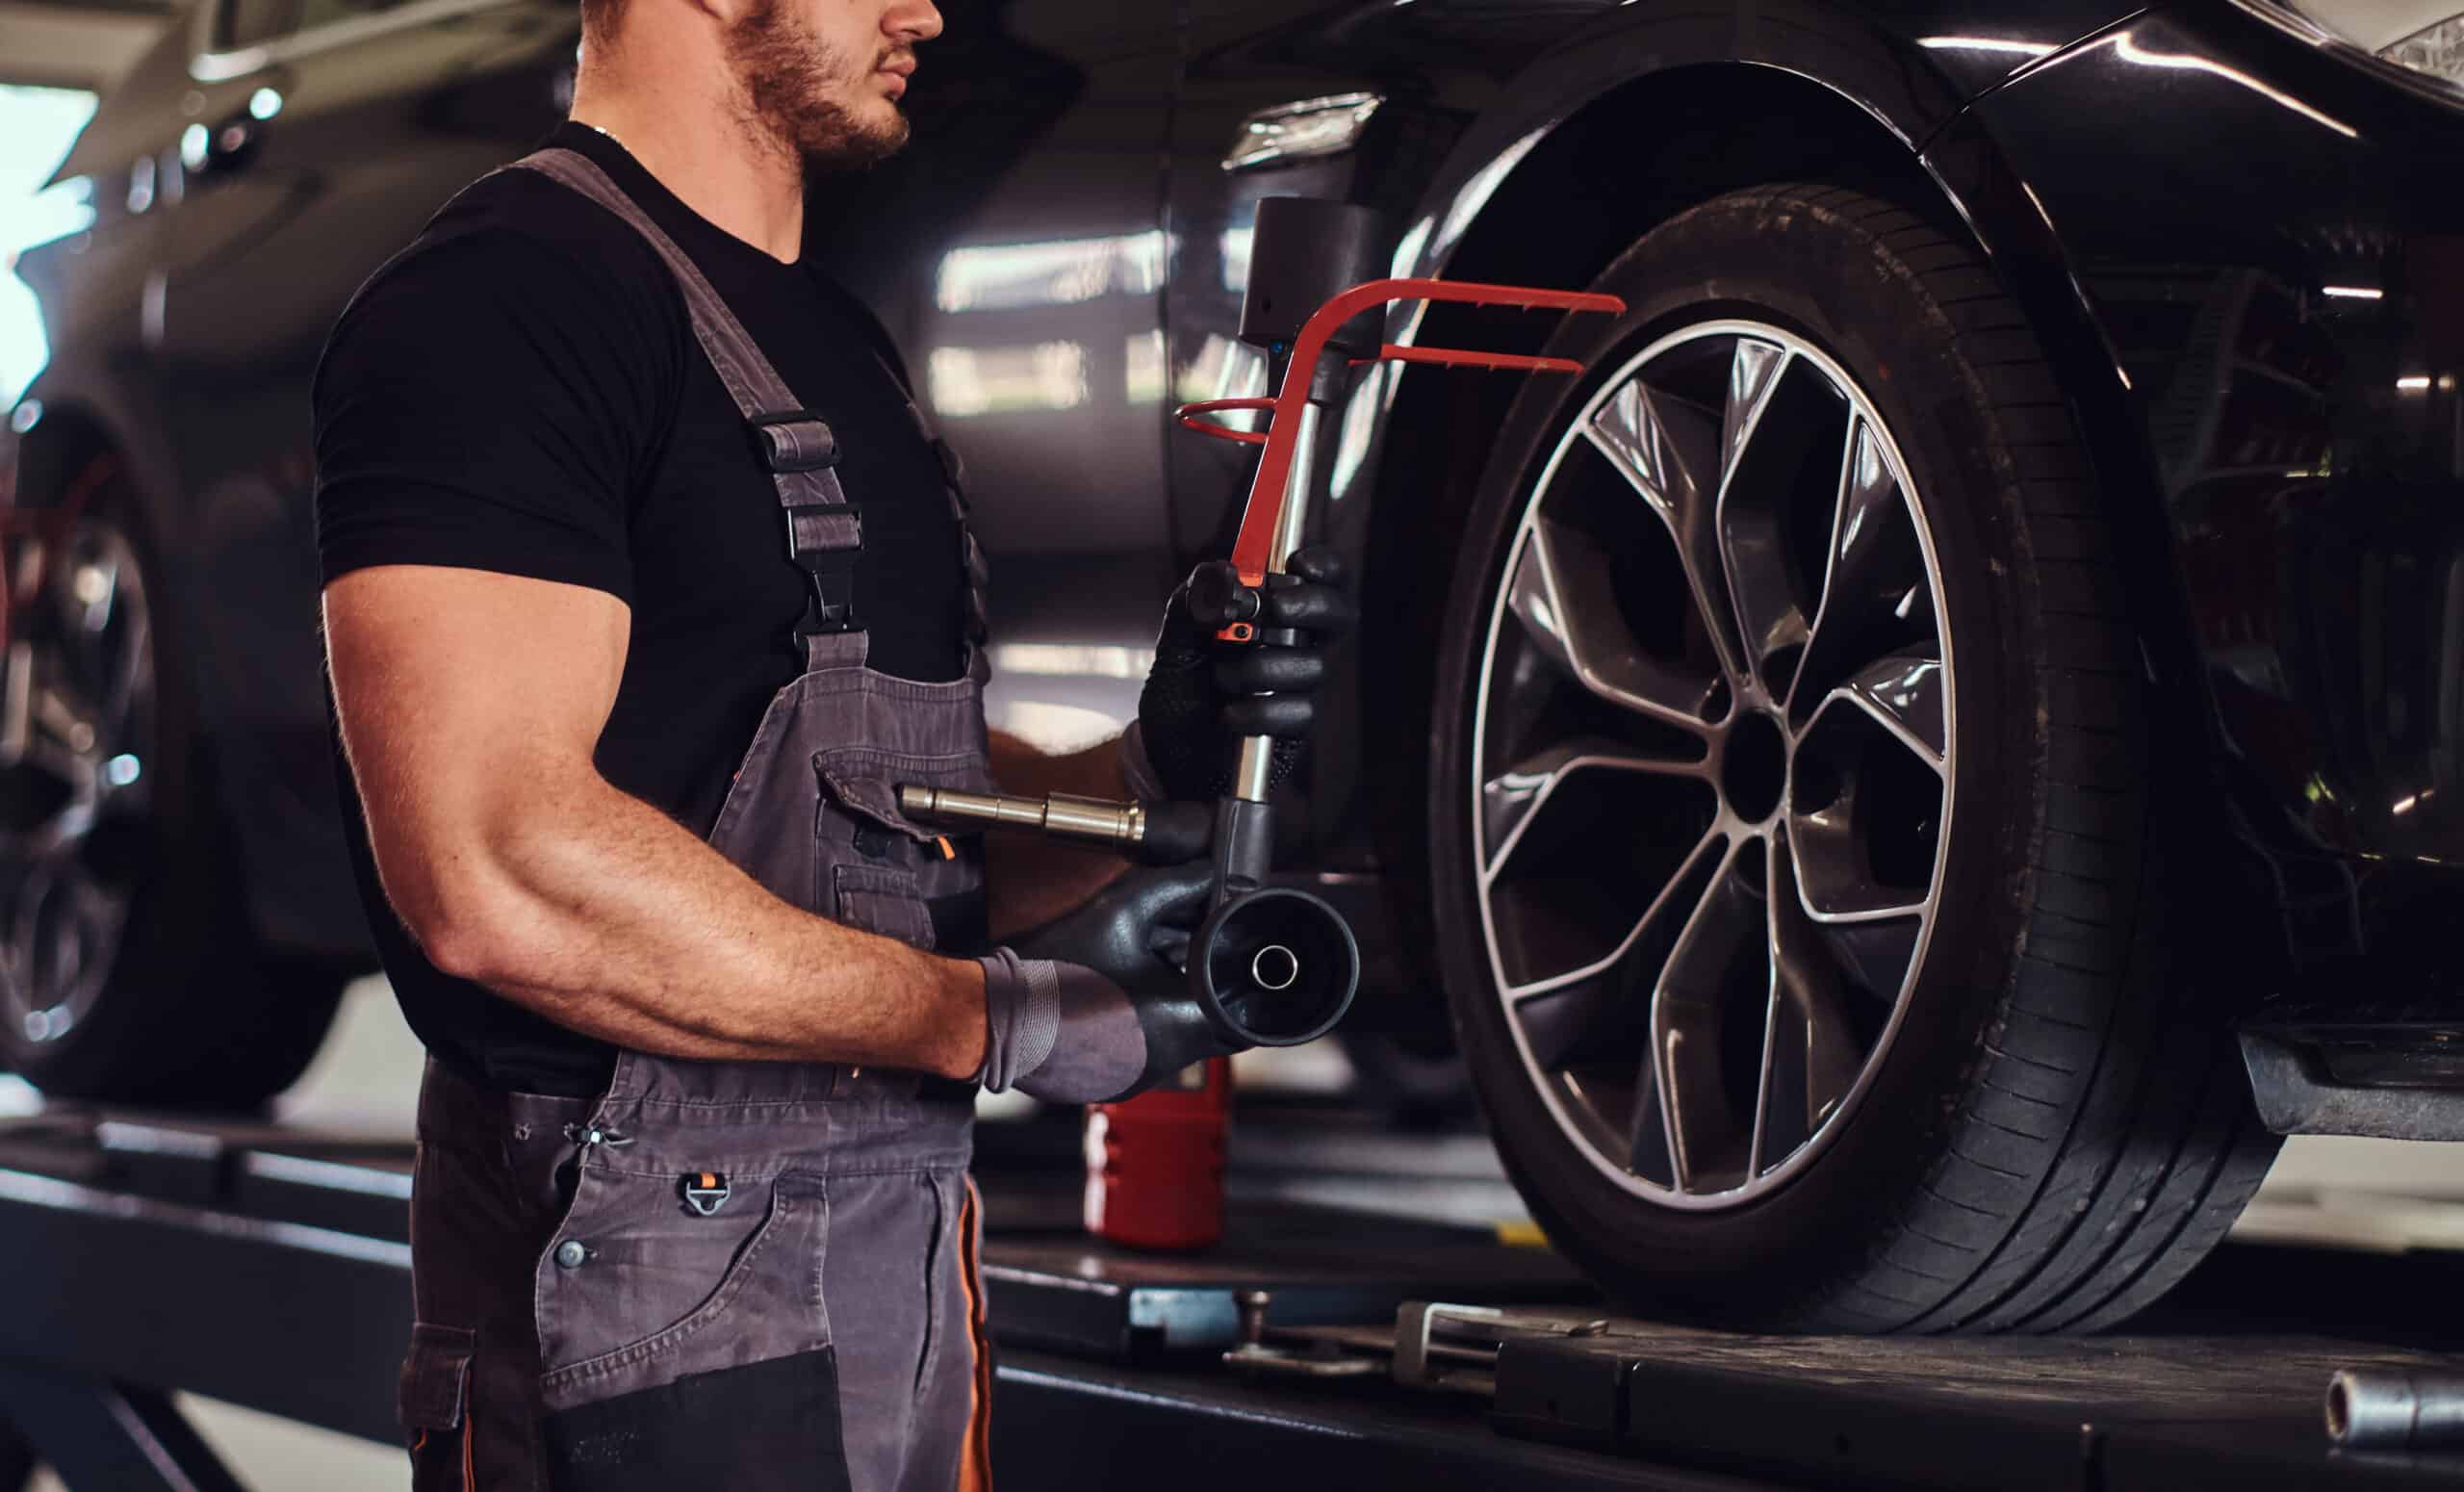 Auto mechanic diligently addressing tire problems by repairing a car tire.